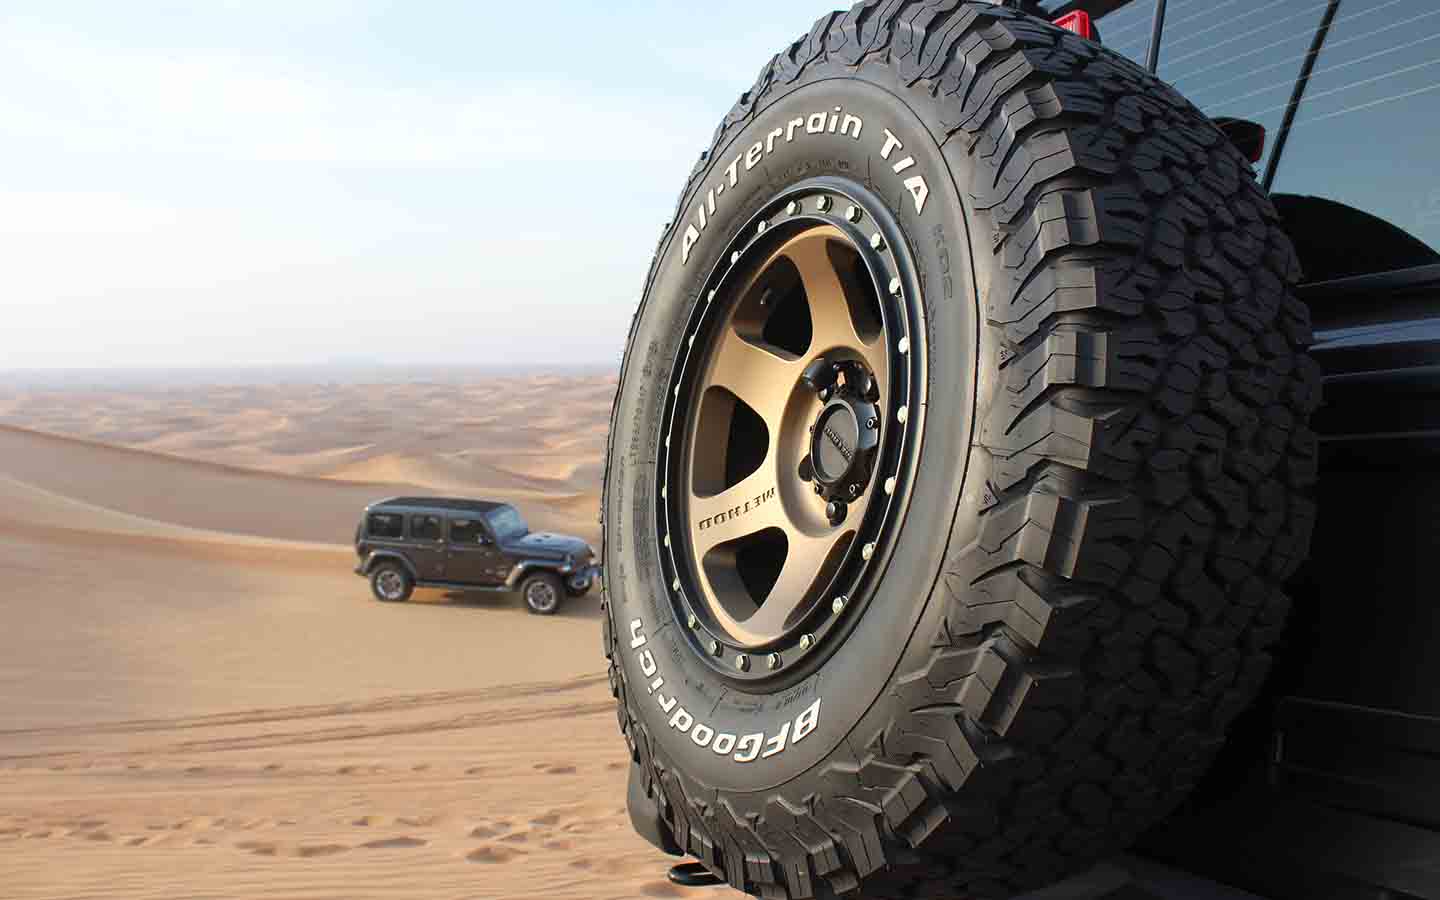 checking tyre pressure is one of the Off-Road Vehicle Maintenance tips